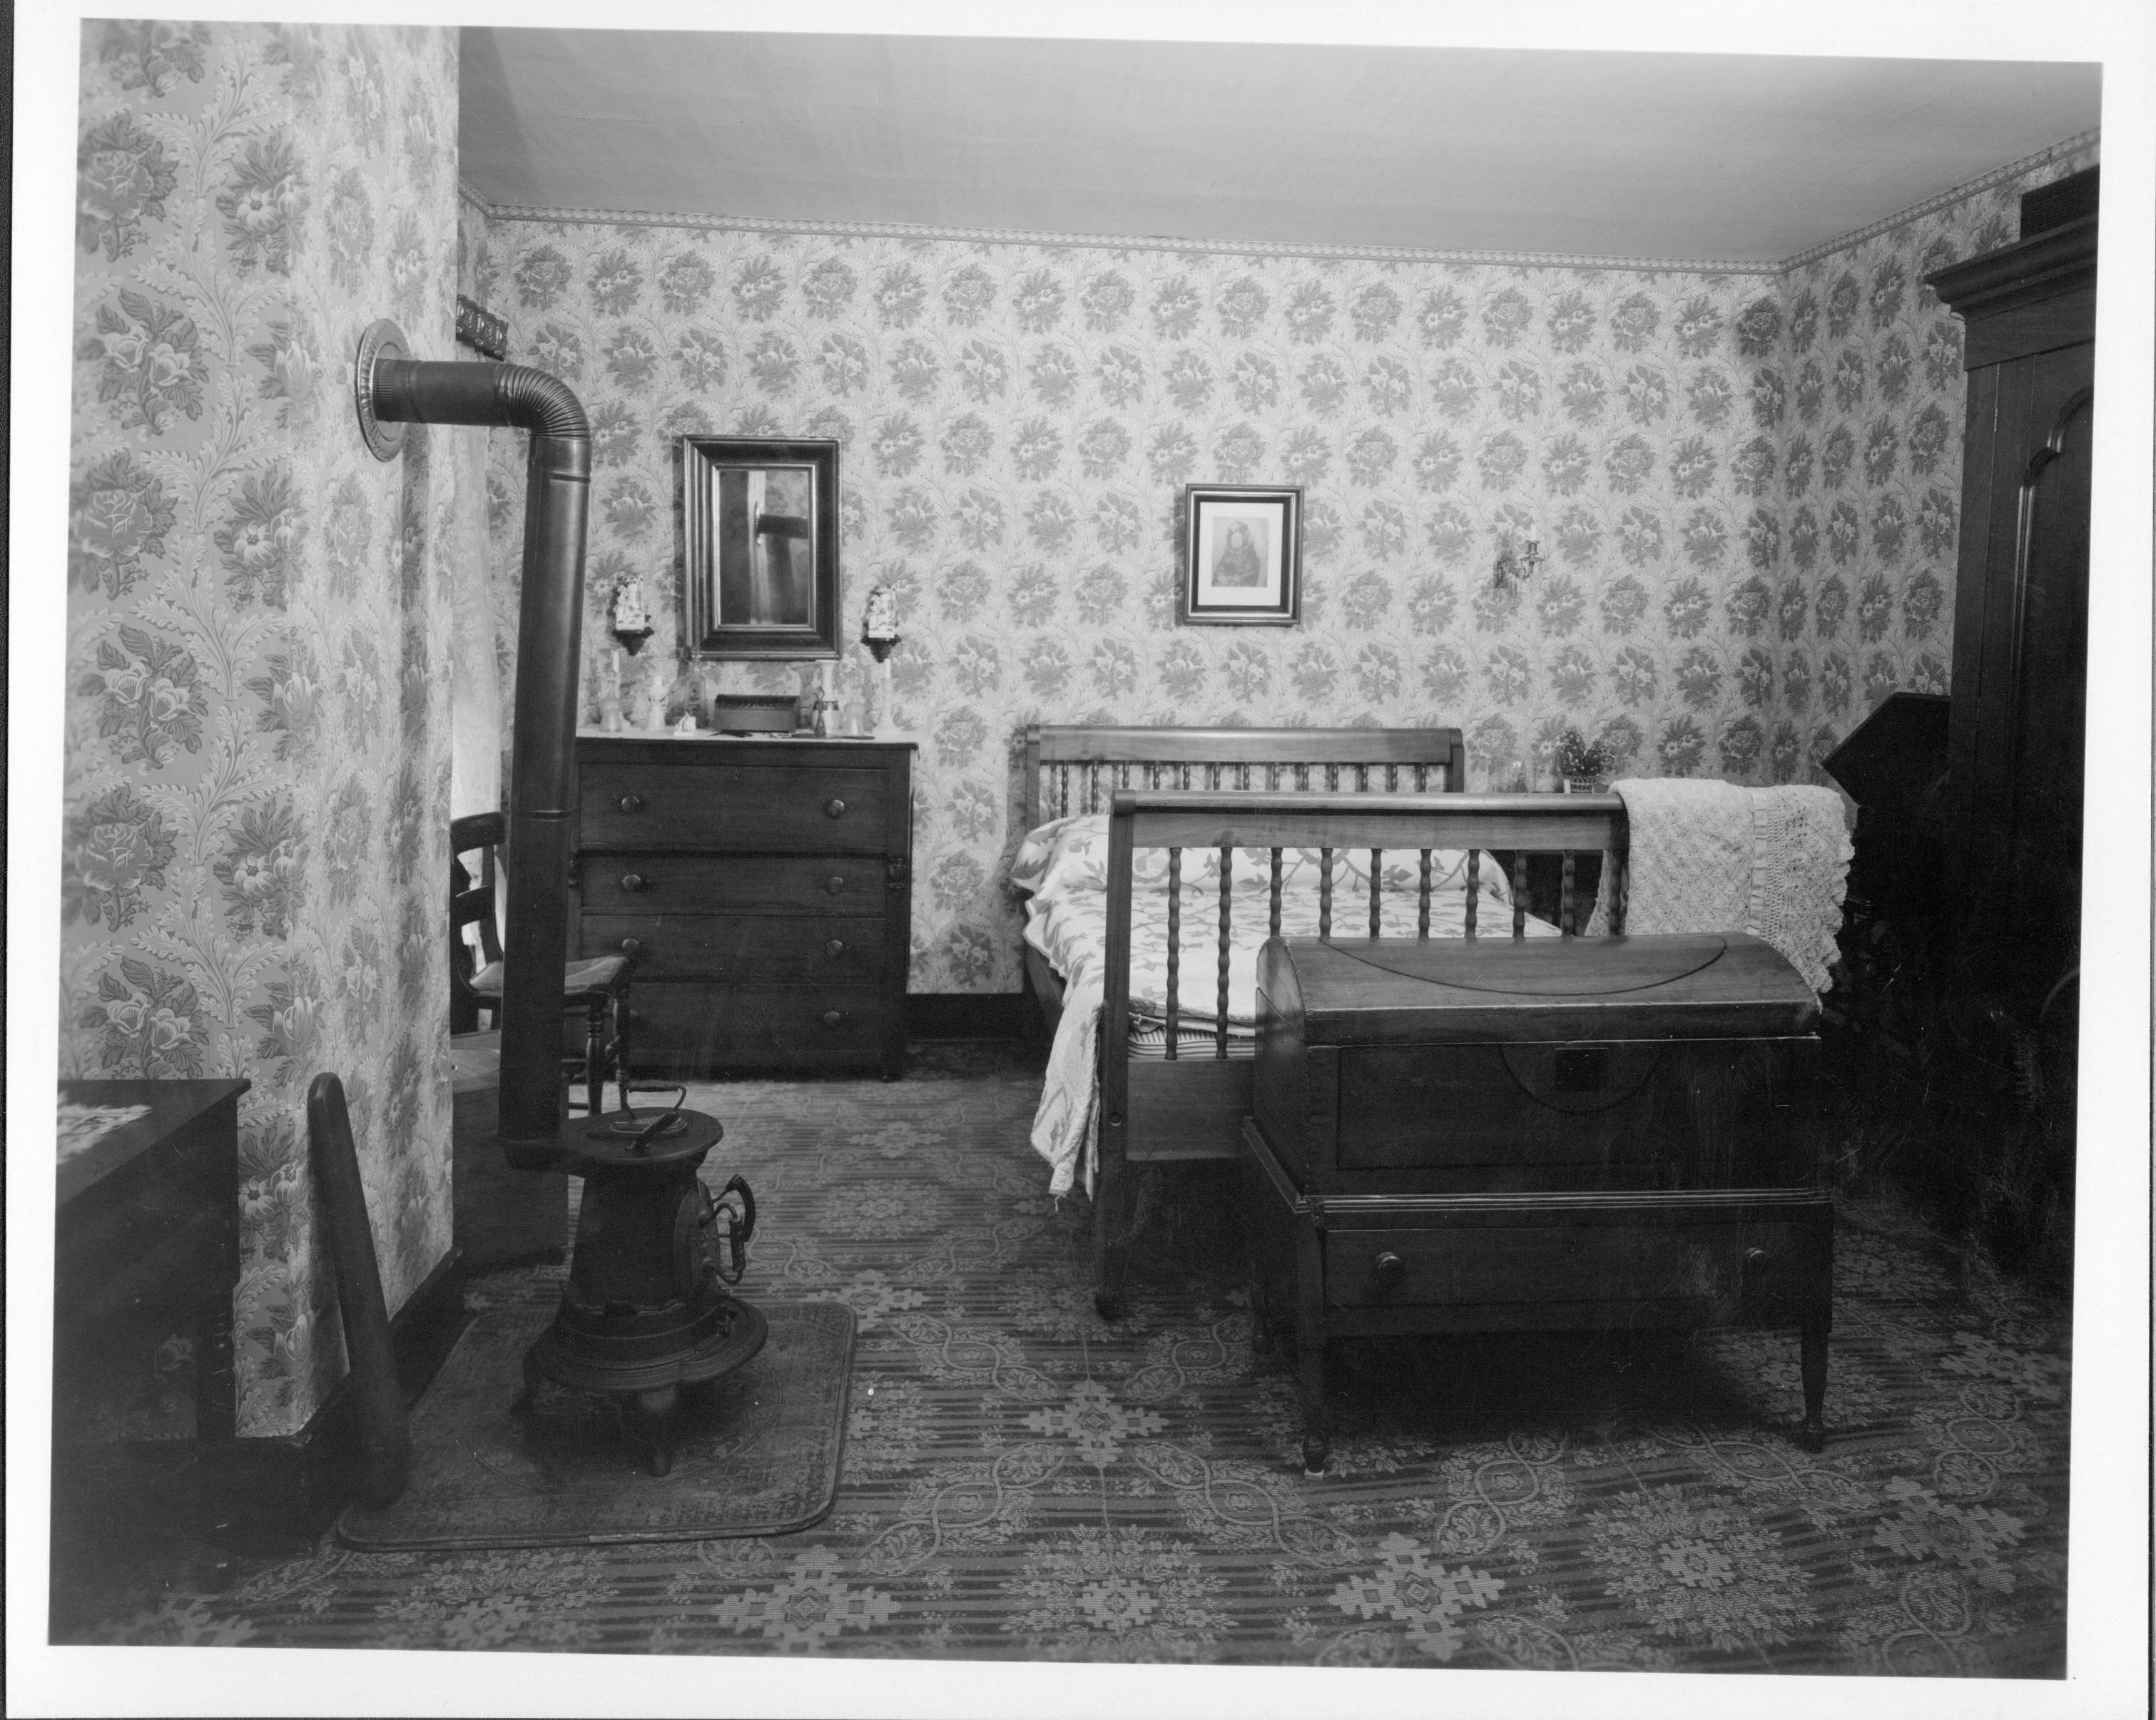 Mrs. Lincoln's Bedroom Lincoln Home, Mrs. Lincoln bedroom, table, pitcher, cups